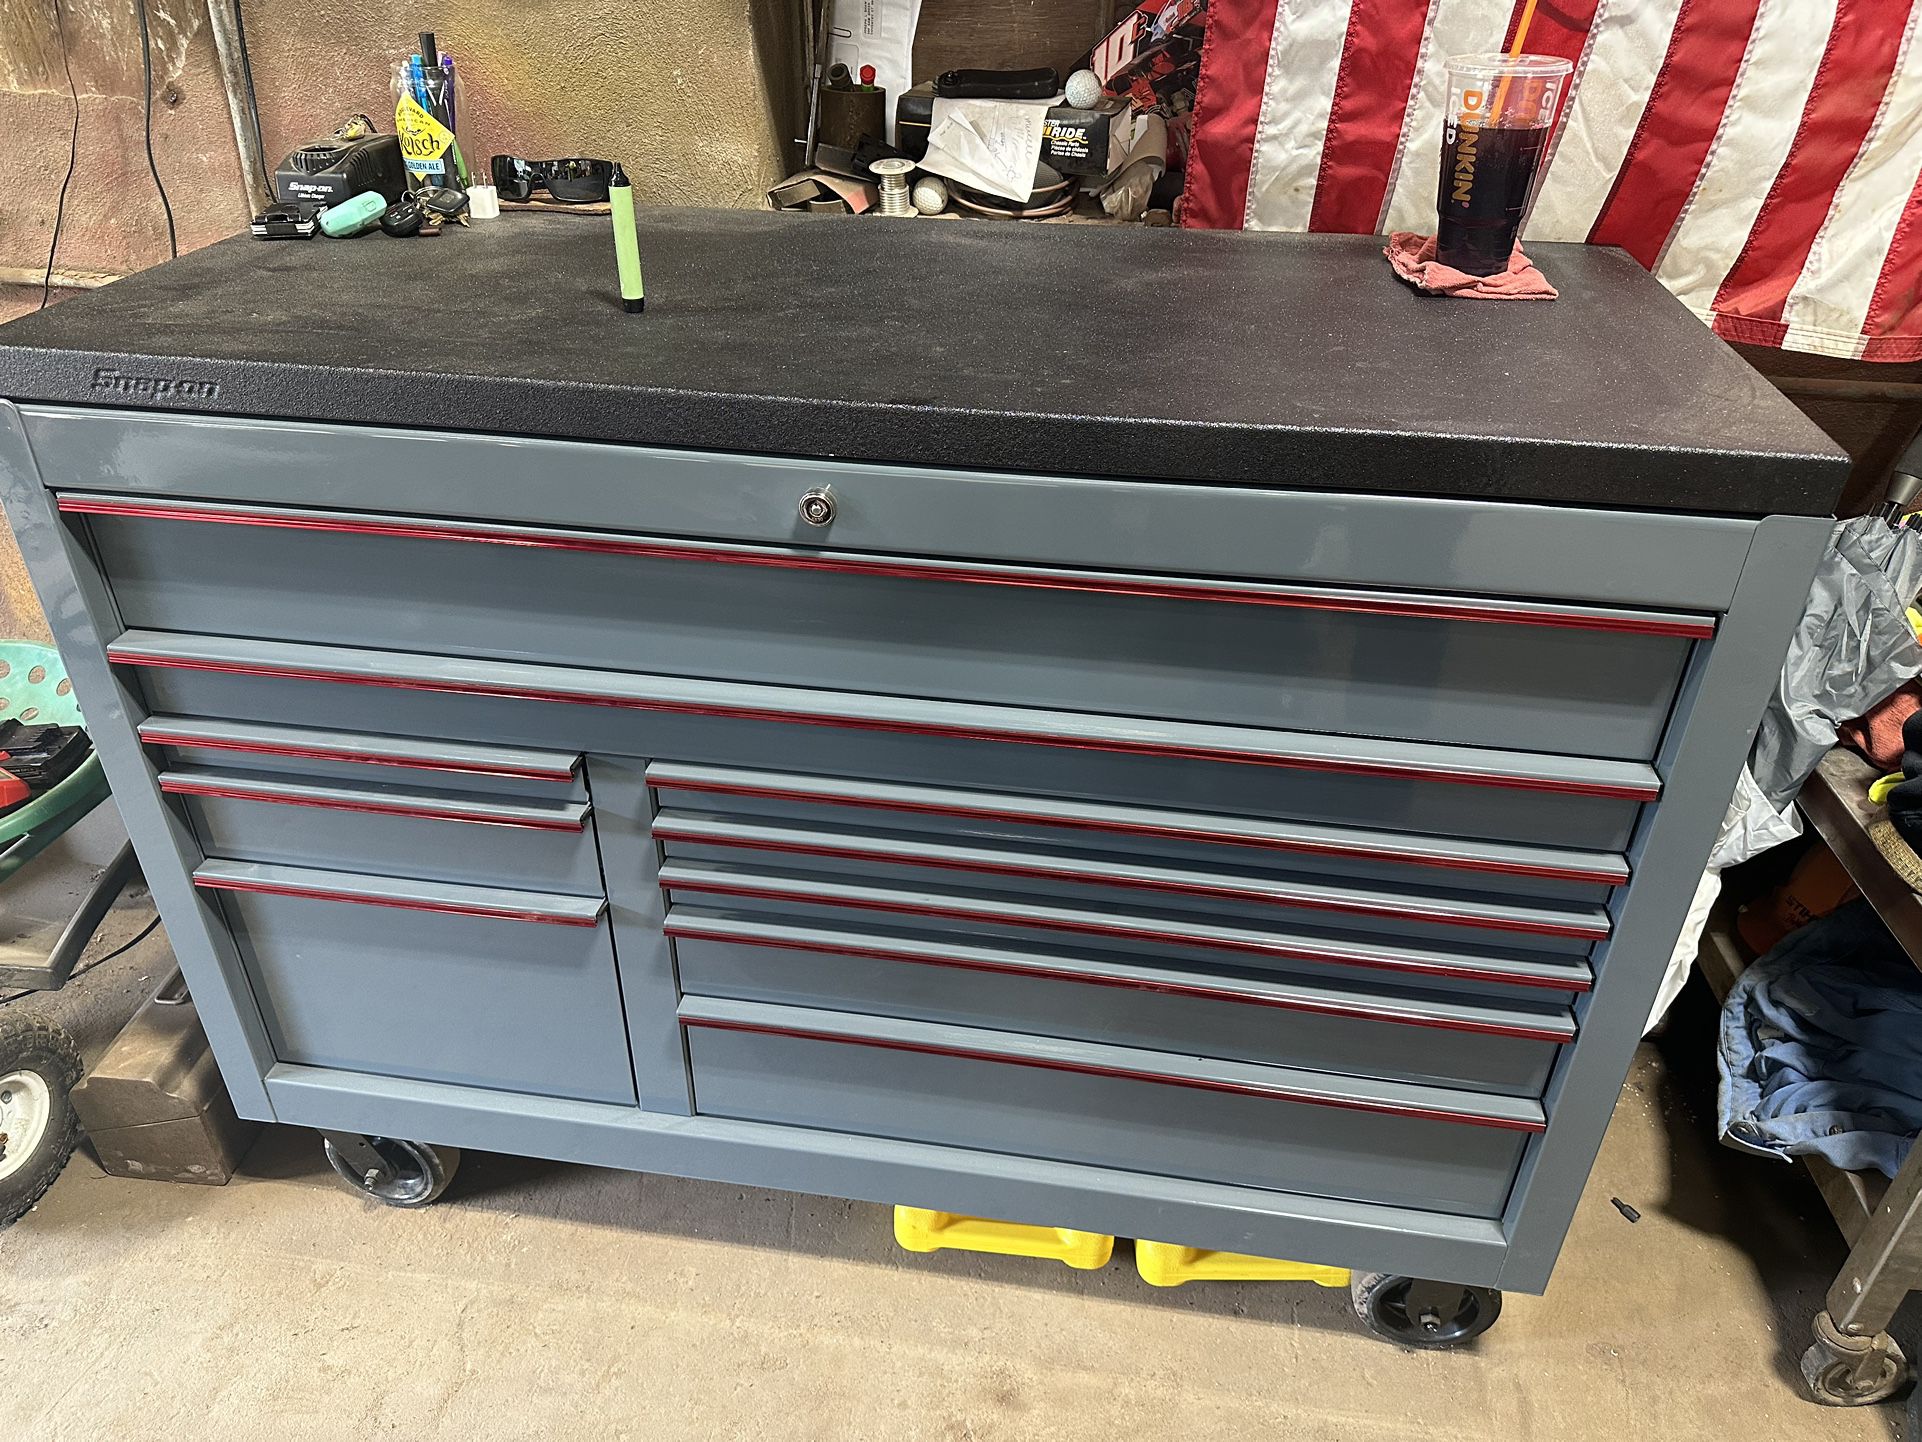 Snap On Toolbox And Tools. 